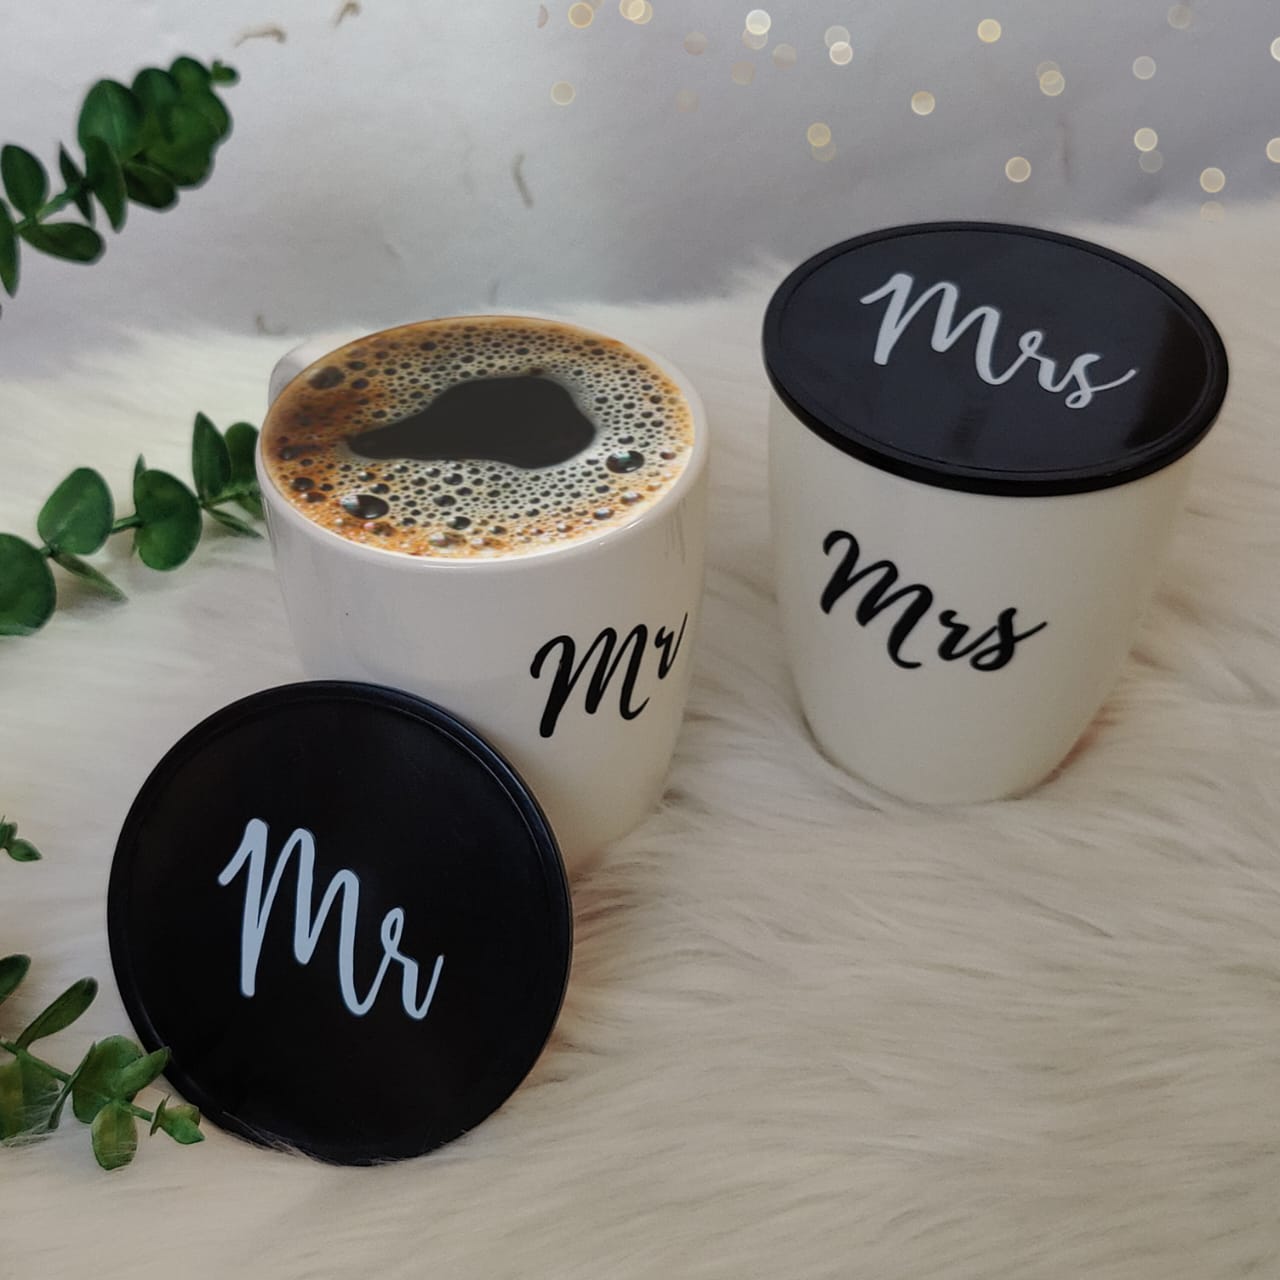 Unbreakable Couple Mugs with coasters - Set of 2 - Mr & Mrs - White and black